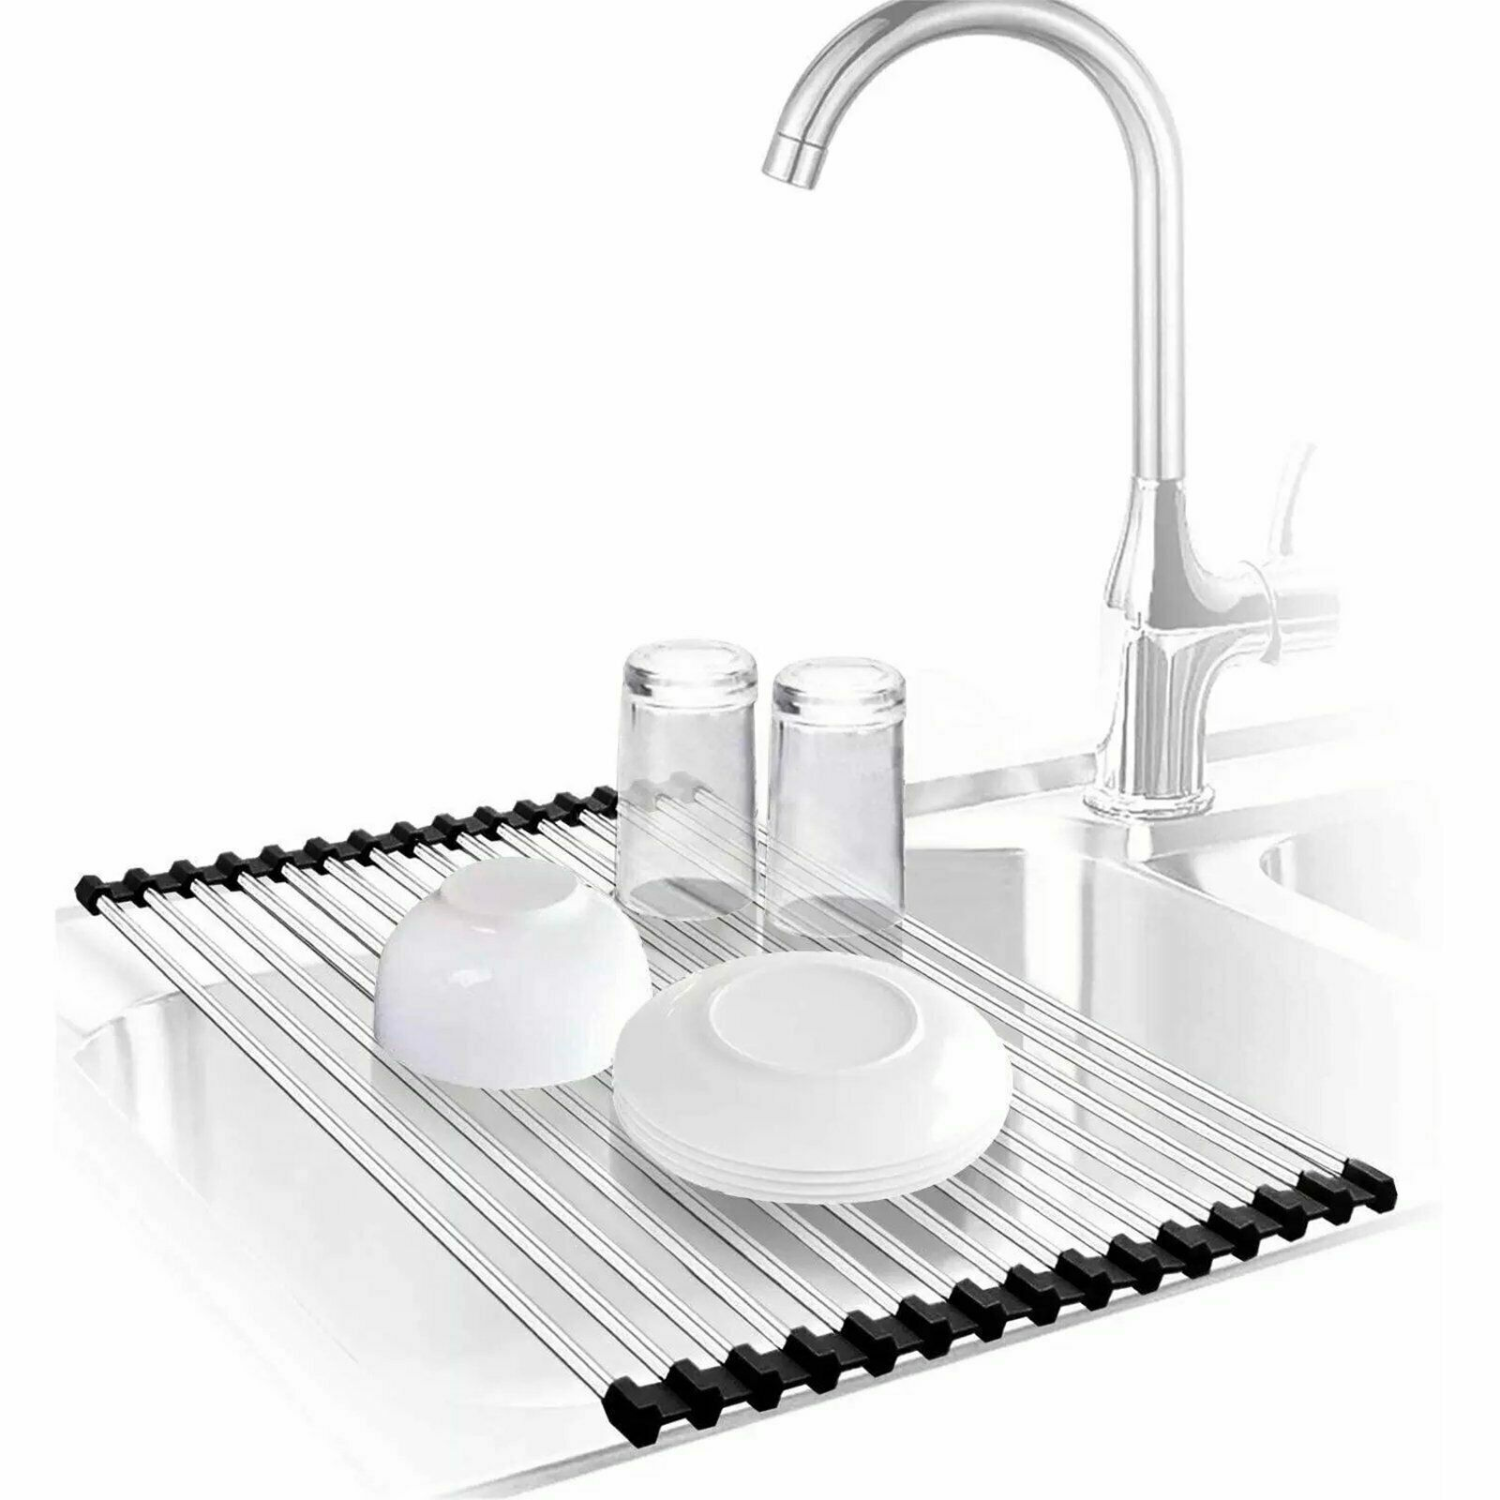 Roll Up Dish Drying Rack Stretchable Stainless Steel Over The Sink Dish Rack Multifunctional Foldable Over Sink Rack with Utensil Holder for Kitchen